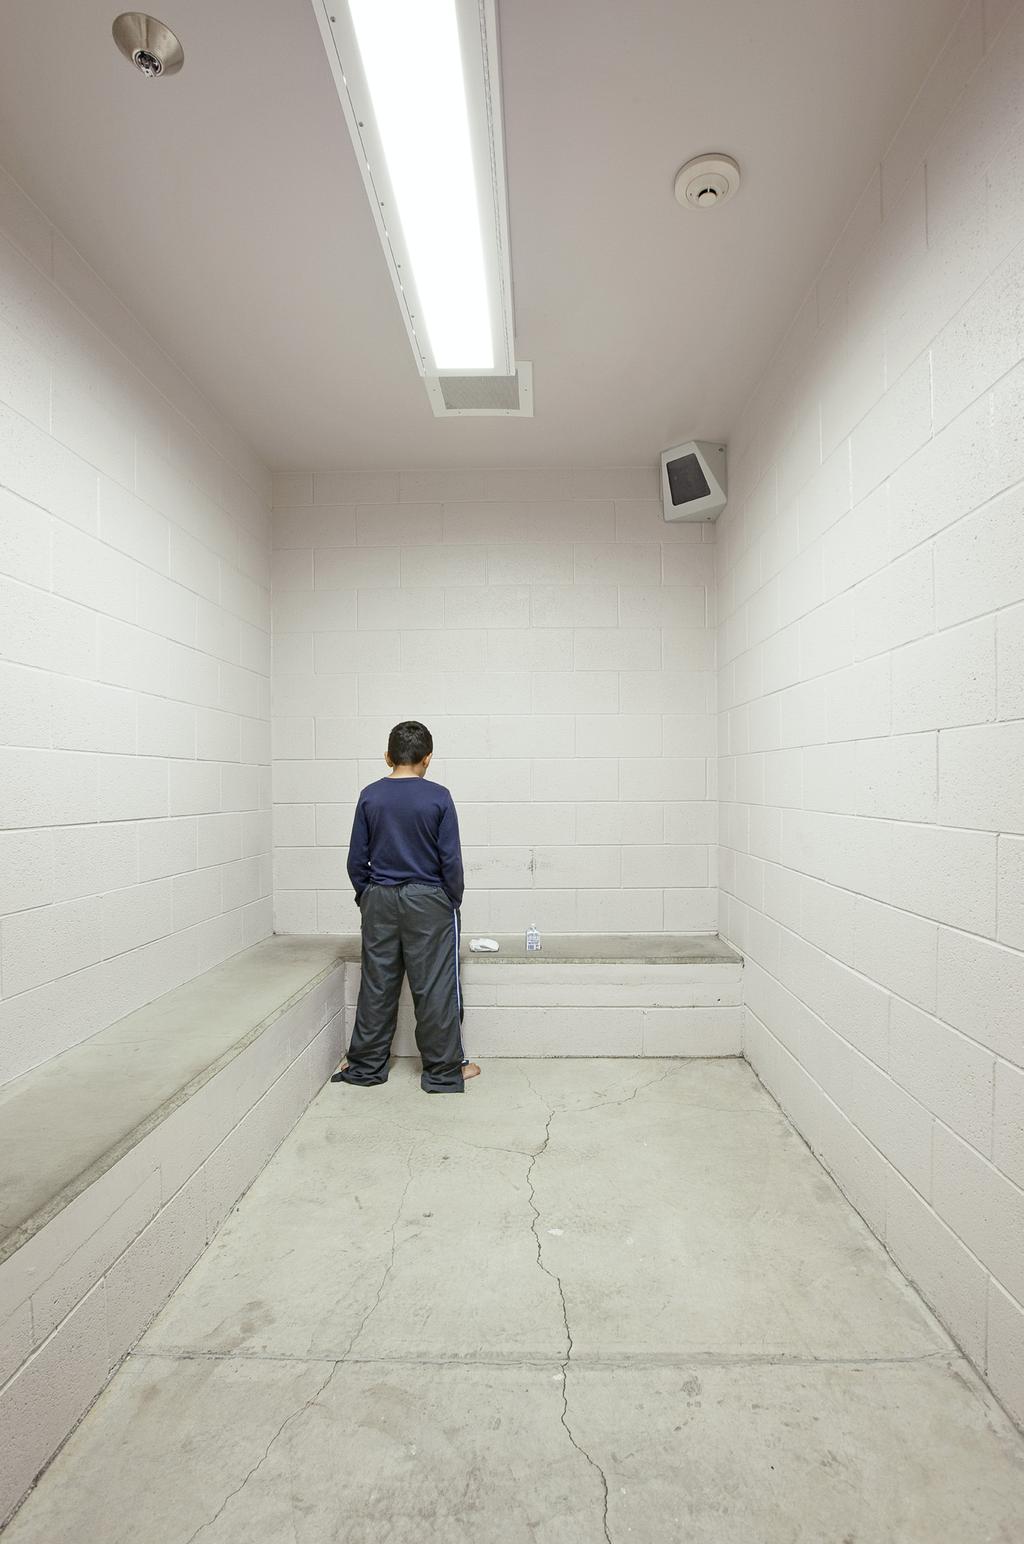 Nearly 3 of every 4 youth confined in a residential facility